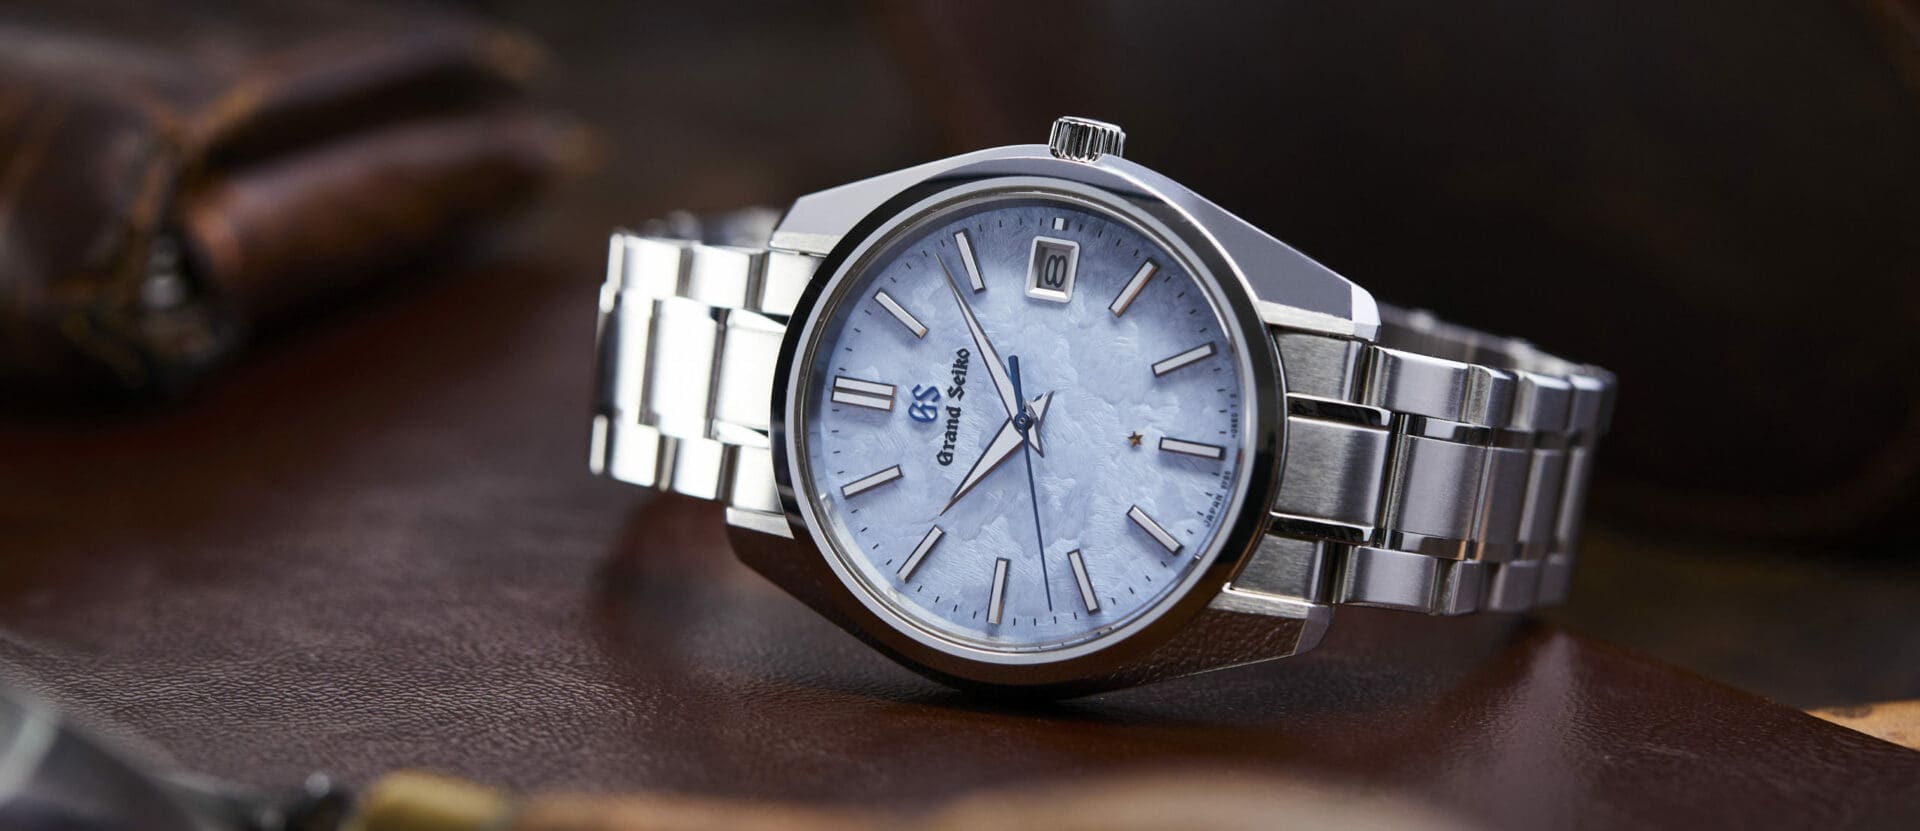 The Grand Seiko SBGP017 raises a refined middle finger to movement snobs